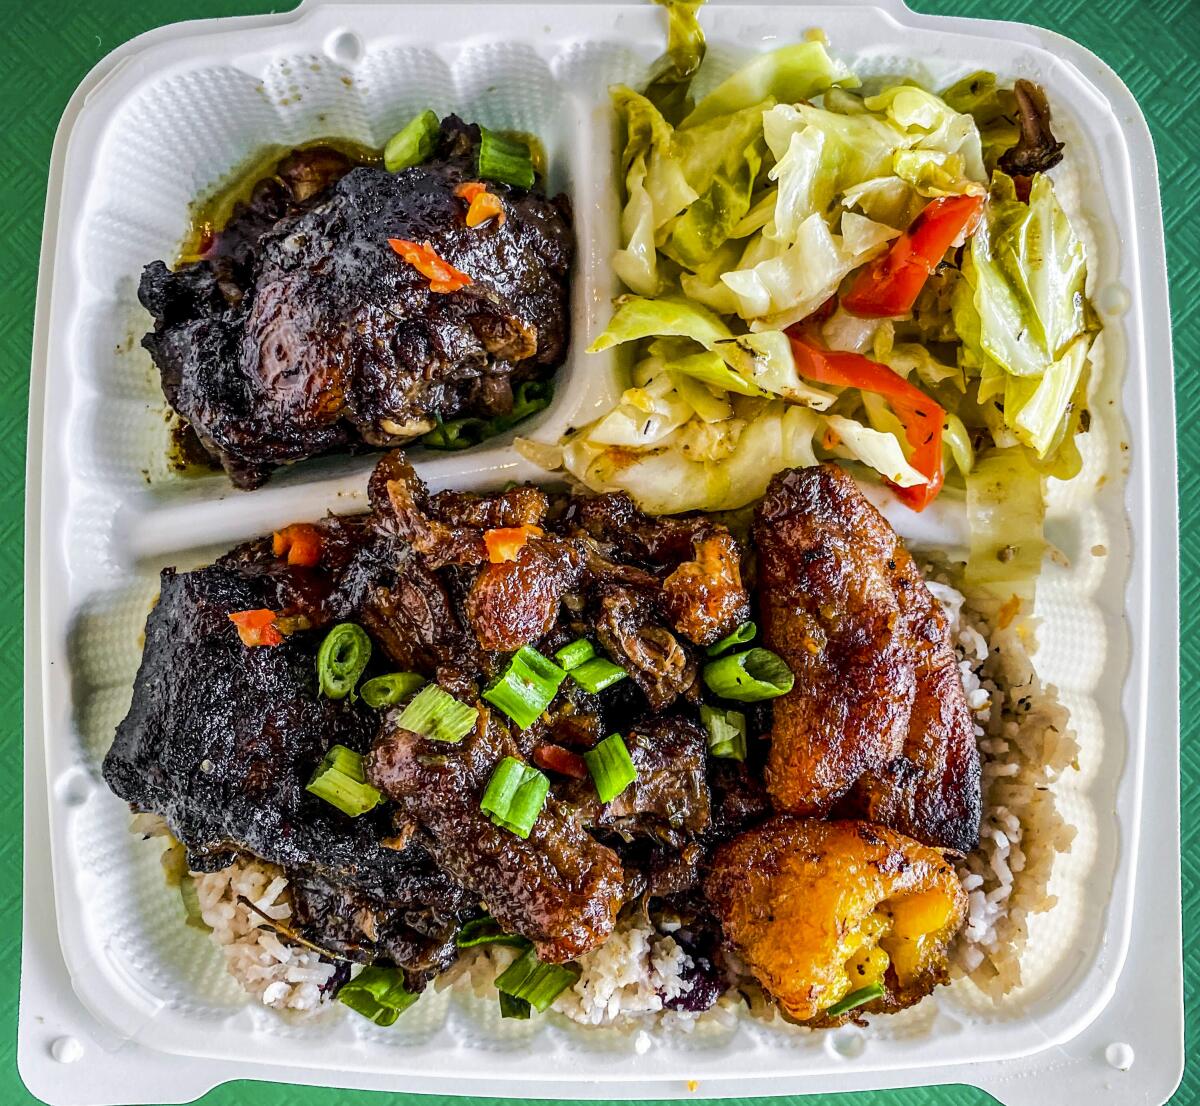 Oxtail stew in a takeout container